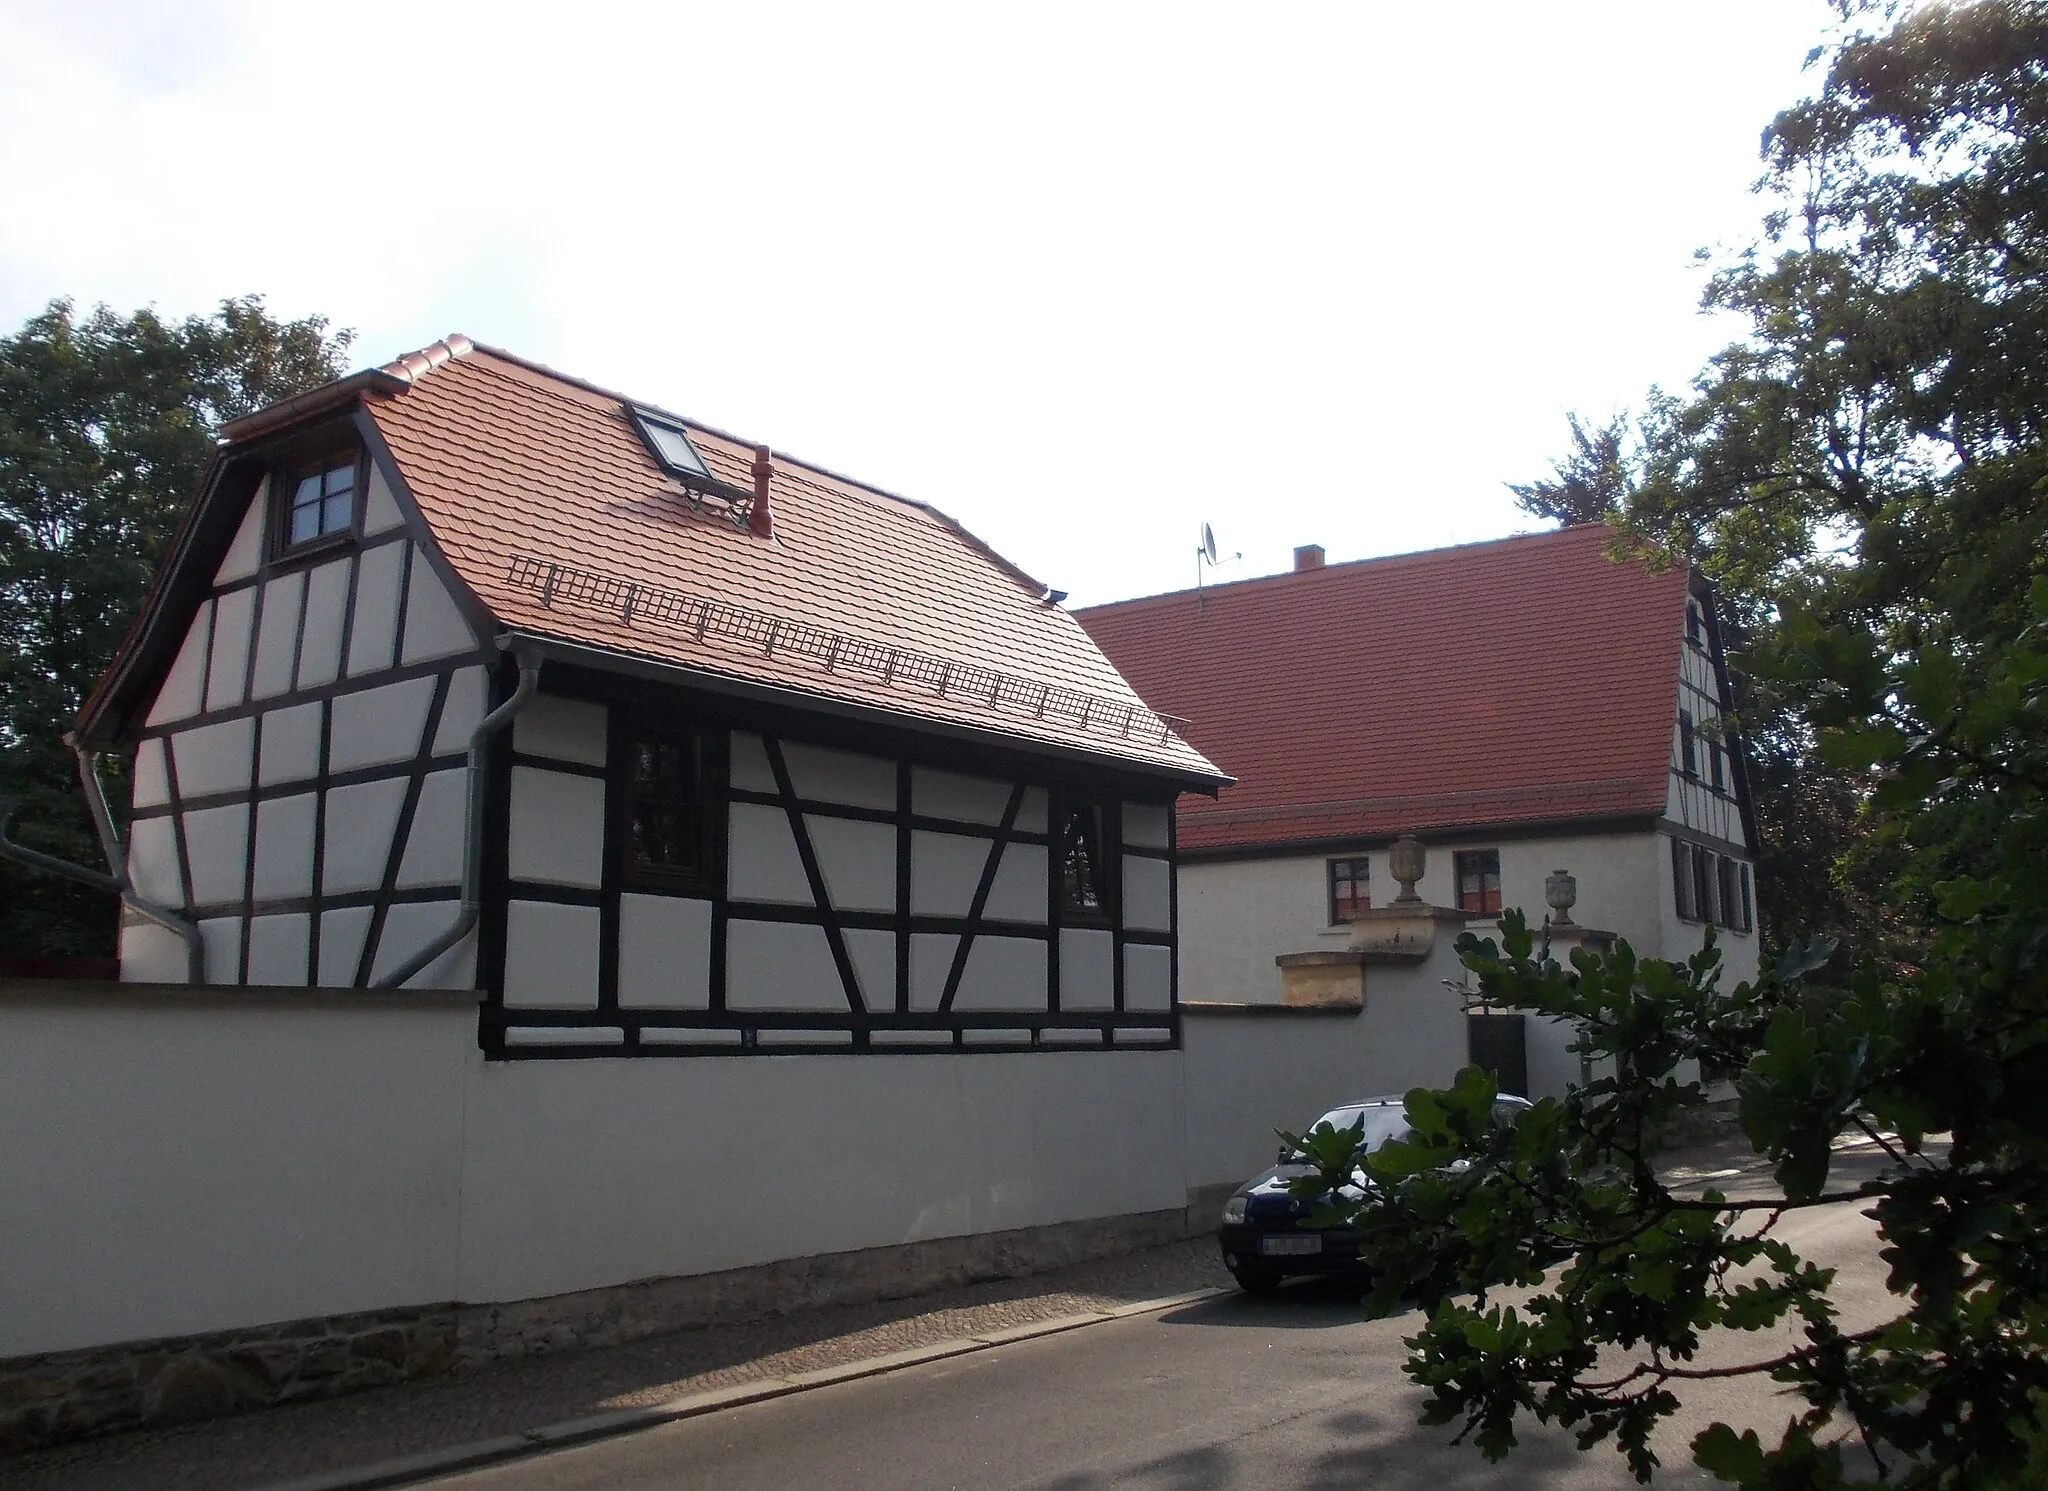 Photo showing: Farmstead at Russenstrasse in Probstheida (Leipzig, Saxony)